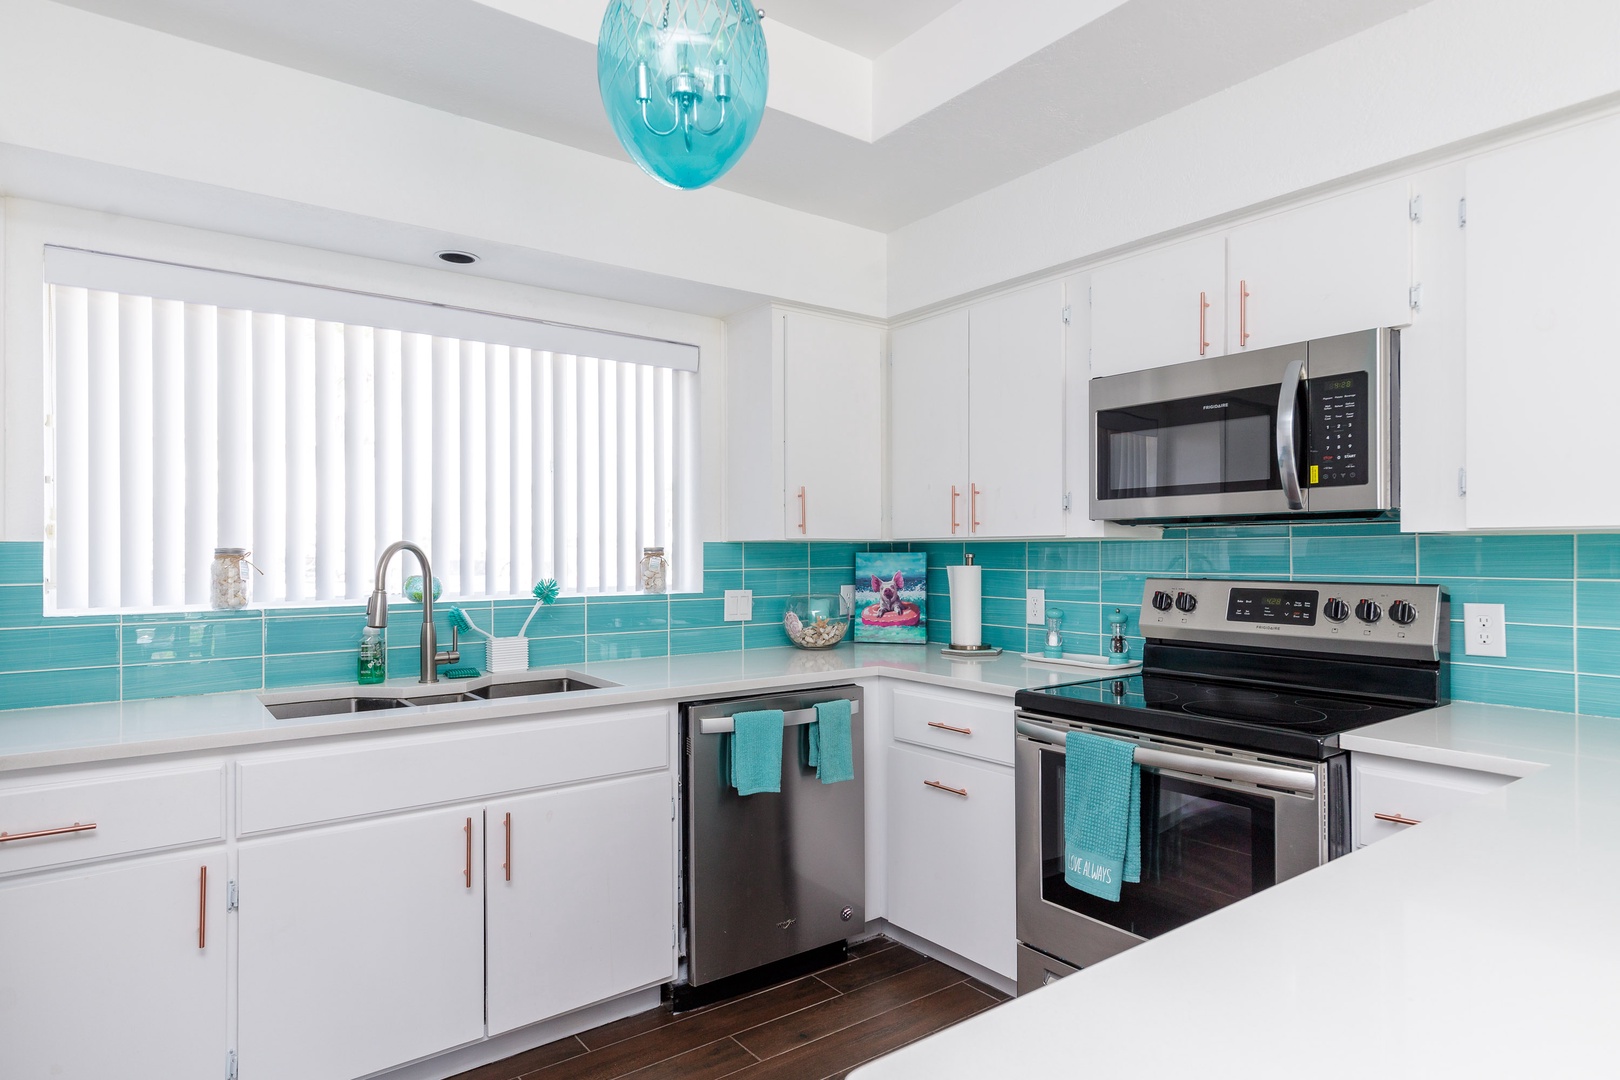 The beachy kitchen offers ample storage space & all the comforts of home